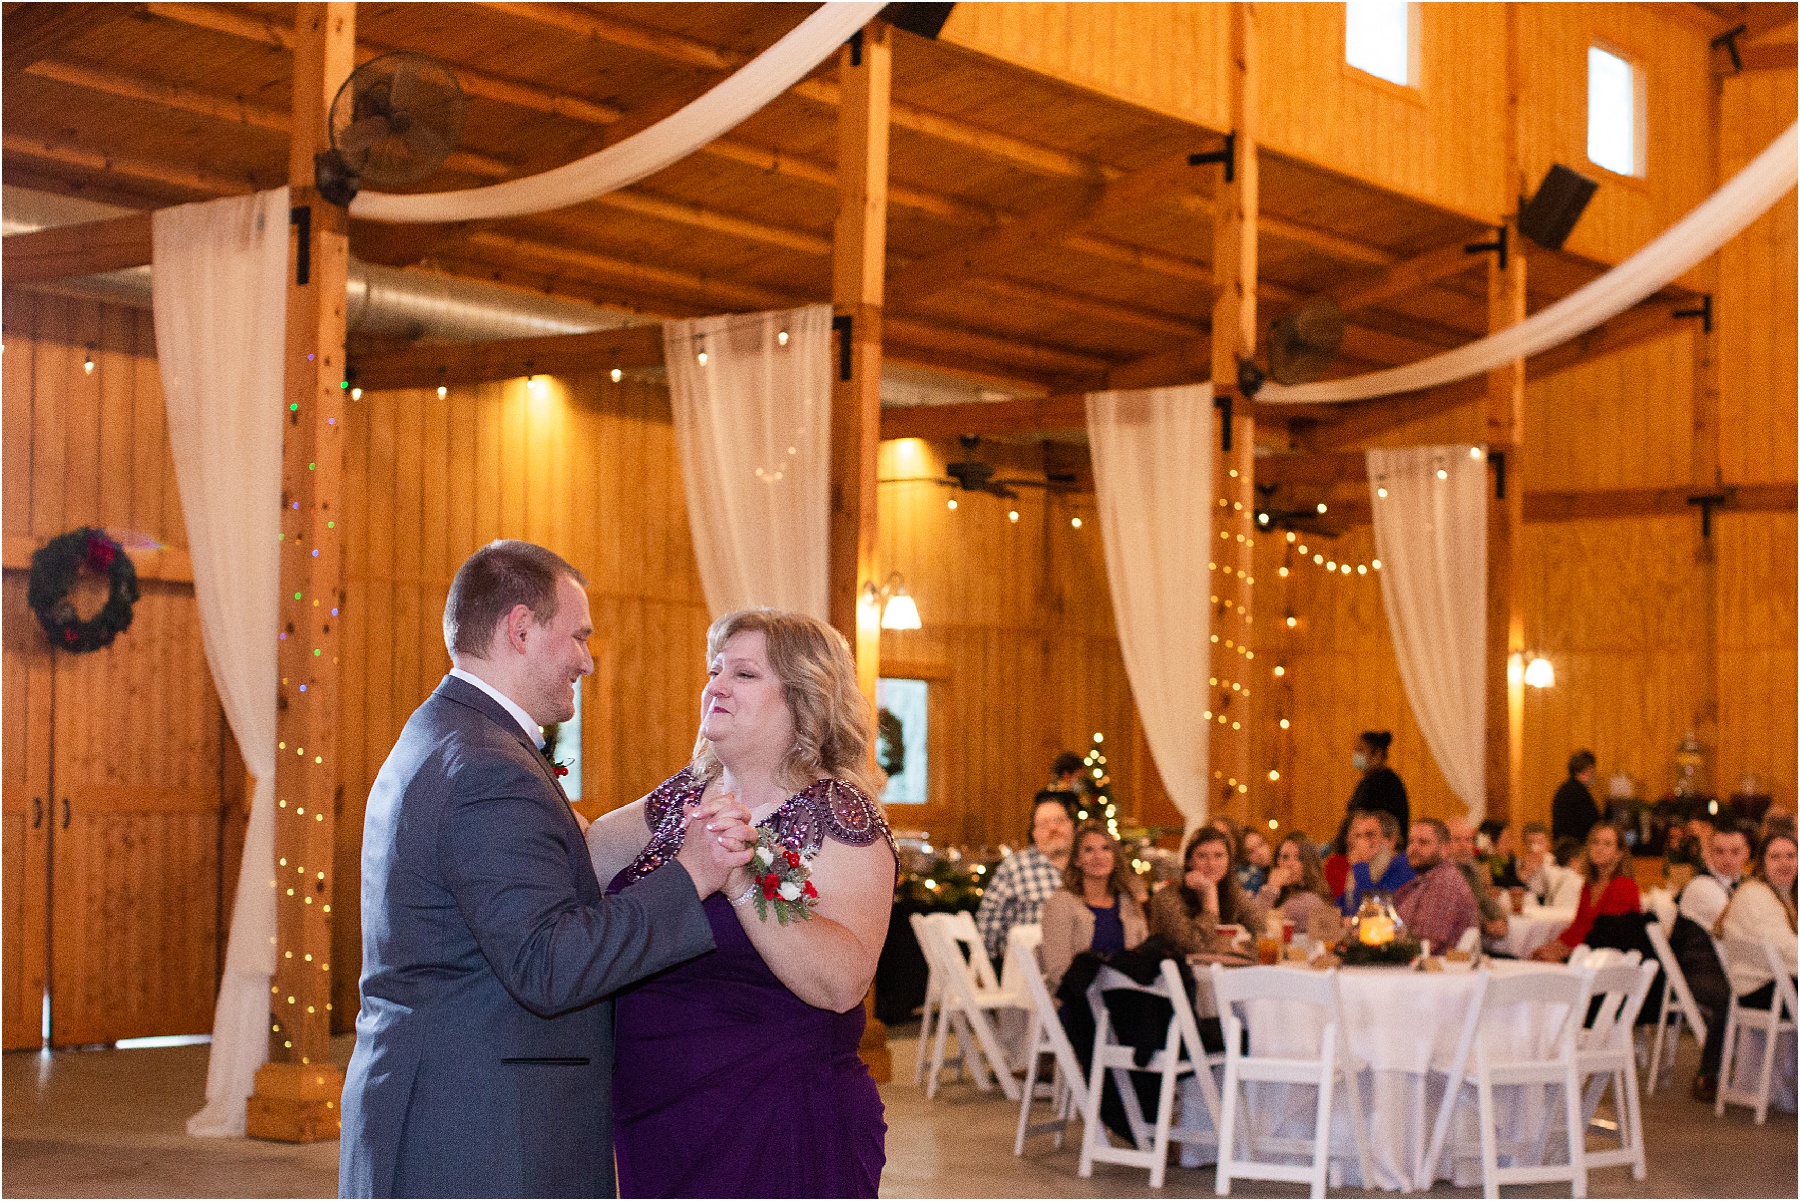 mom and groom dance in a barn venue with guests in background